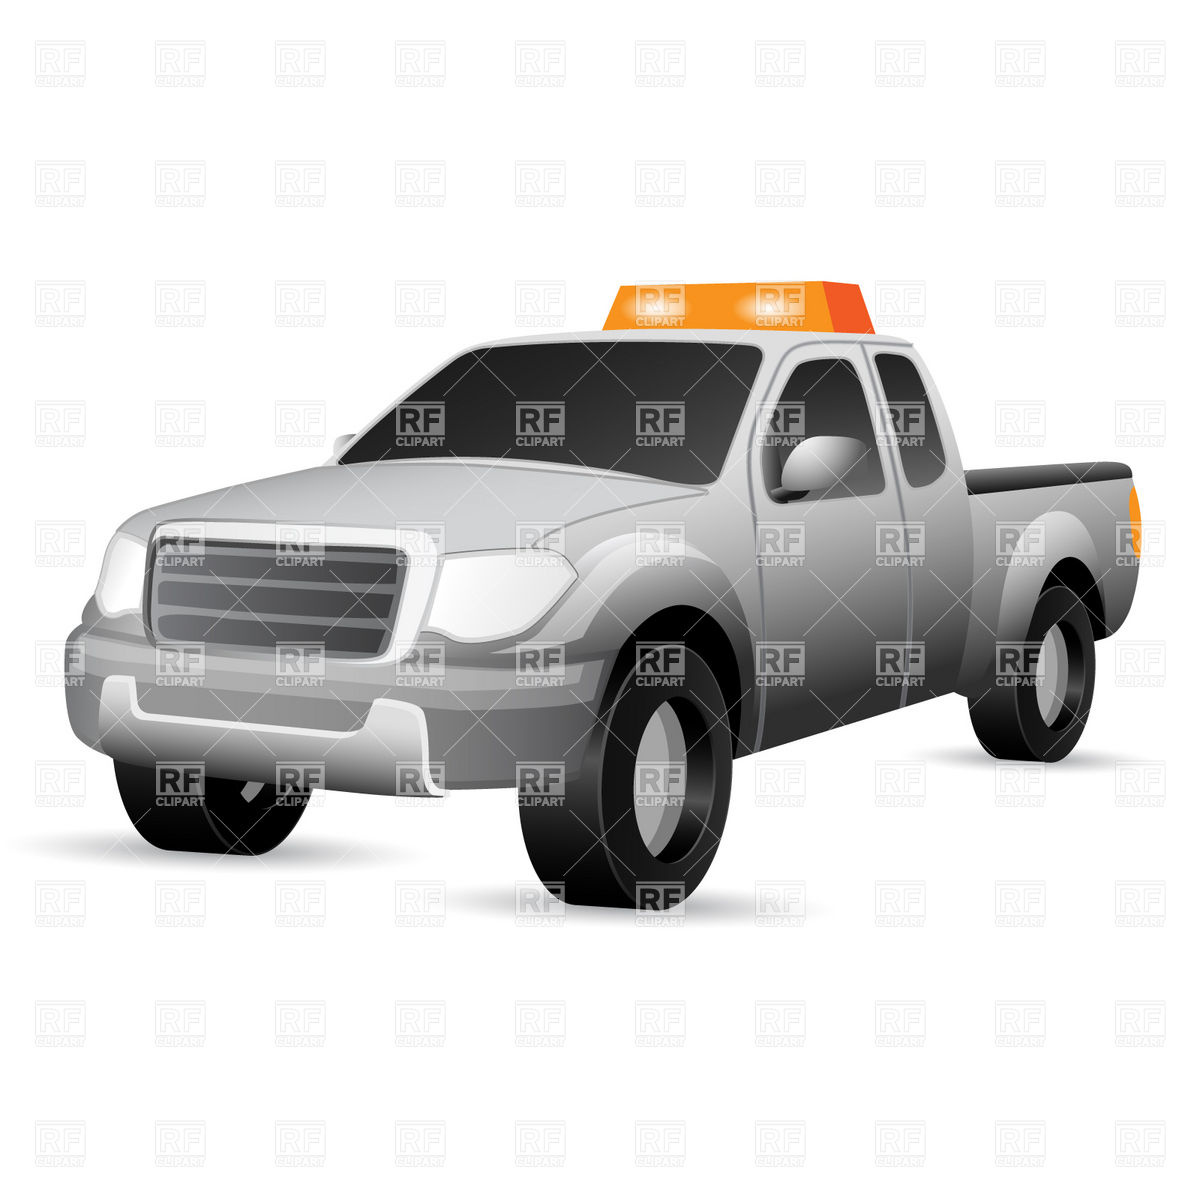     Up Truck With Flash Light Download Royalty Free Vector Clipart  Eps